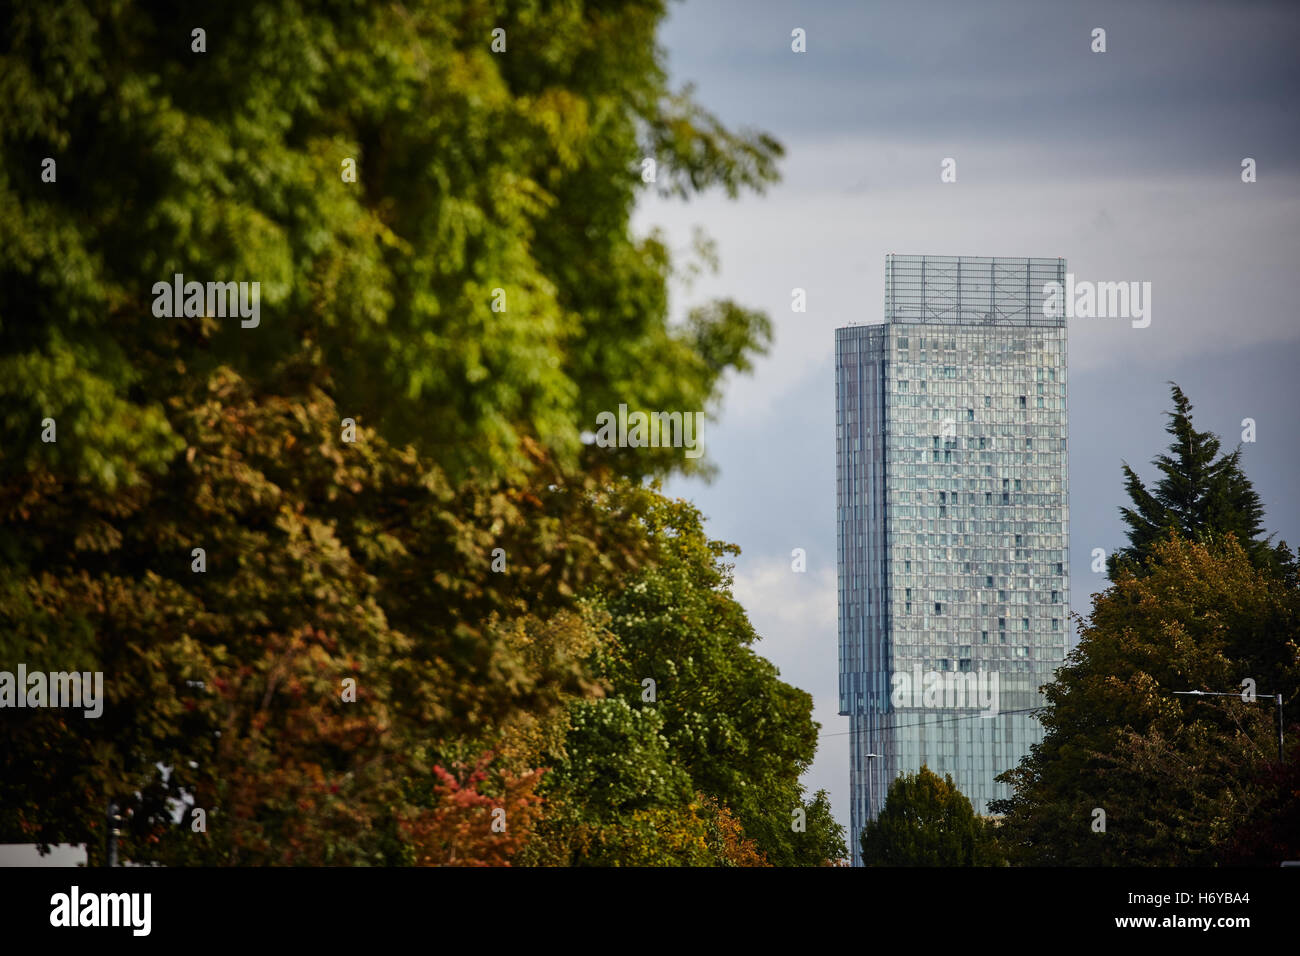 Manchester Beetham Tower Green space   Trees copyspace landmark architecture environmental pretty landscape cityscape tower bloc Stock Photo